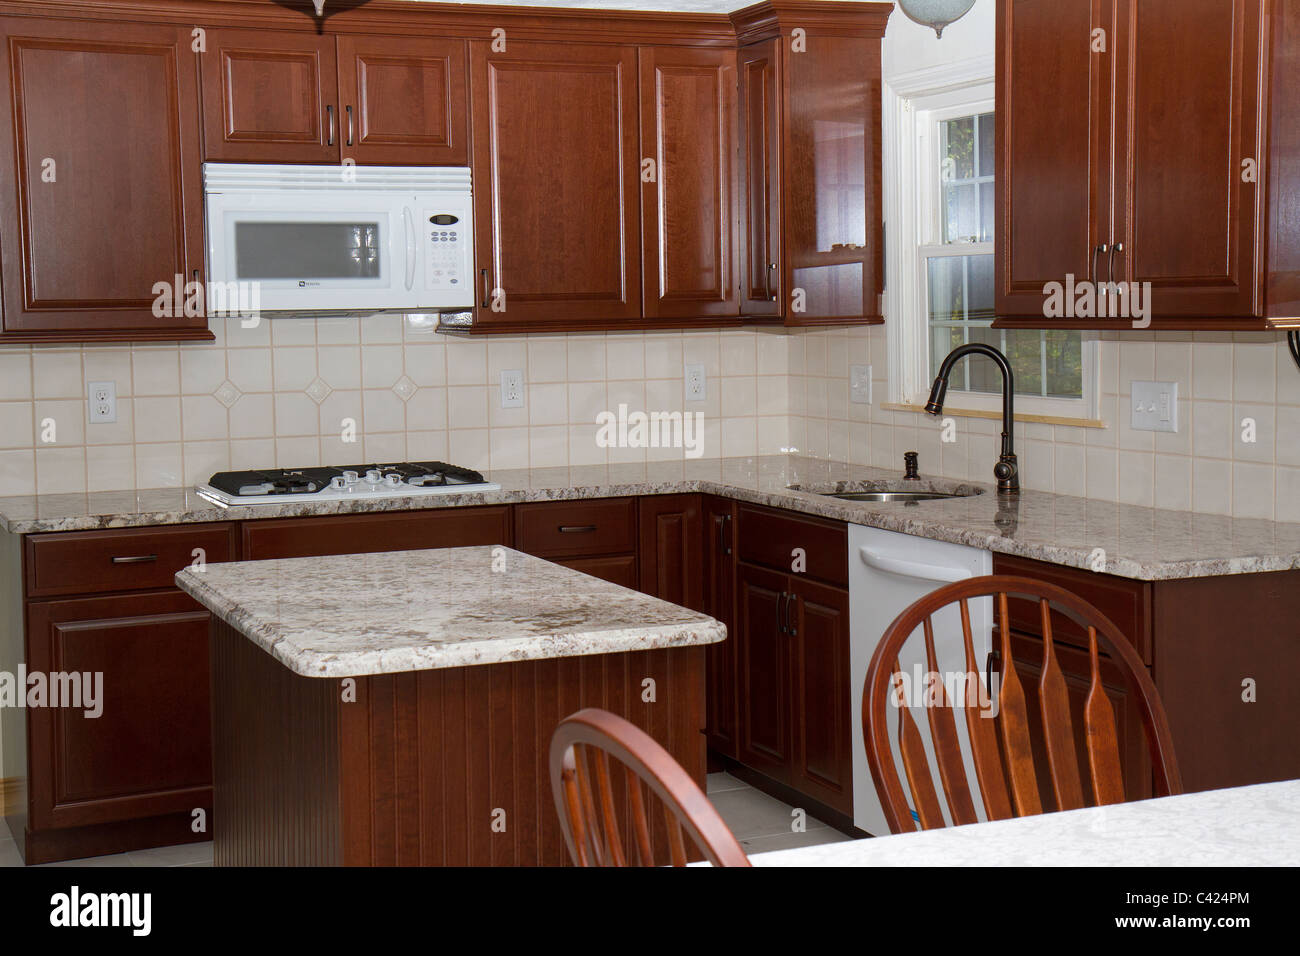 New Cherry Cabinets Granite Counter Tops And Ceramic Tile Floor